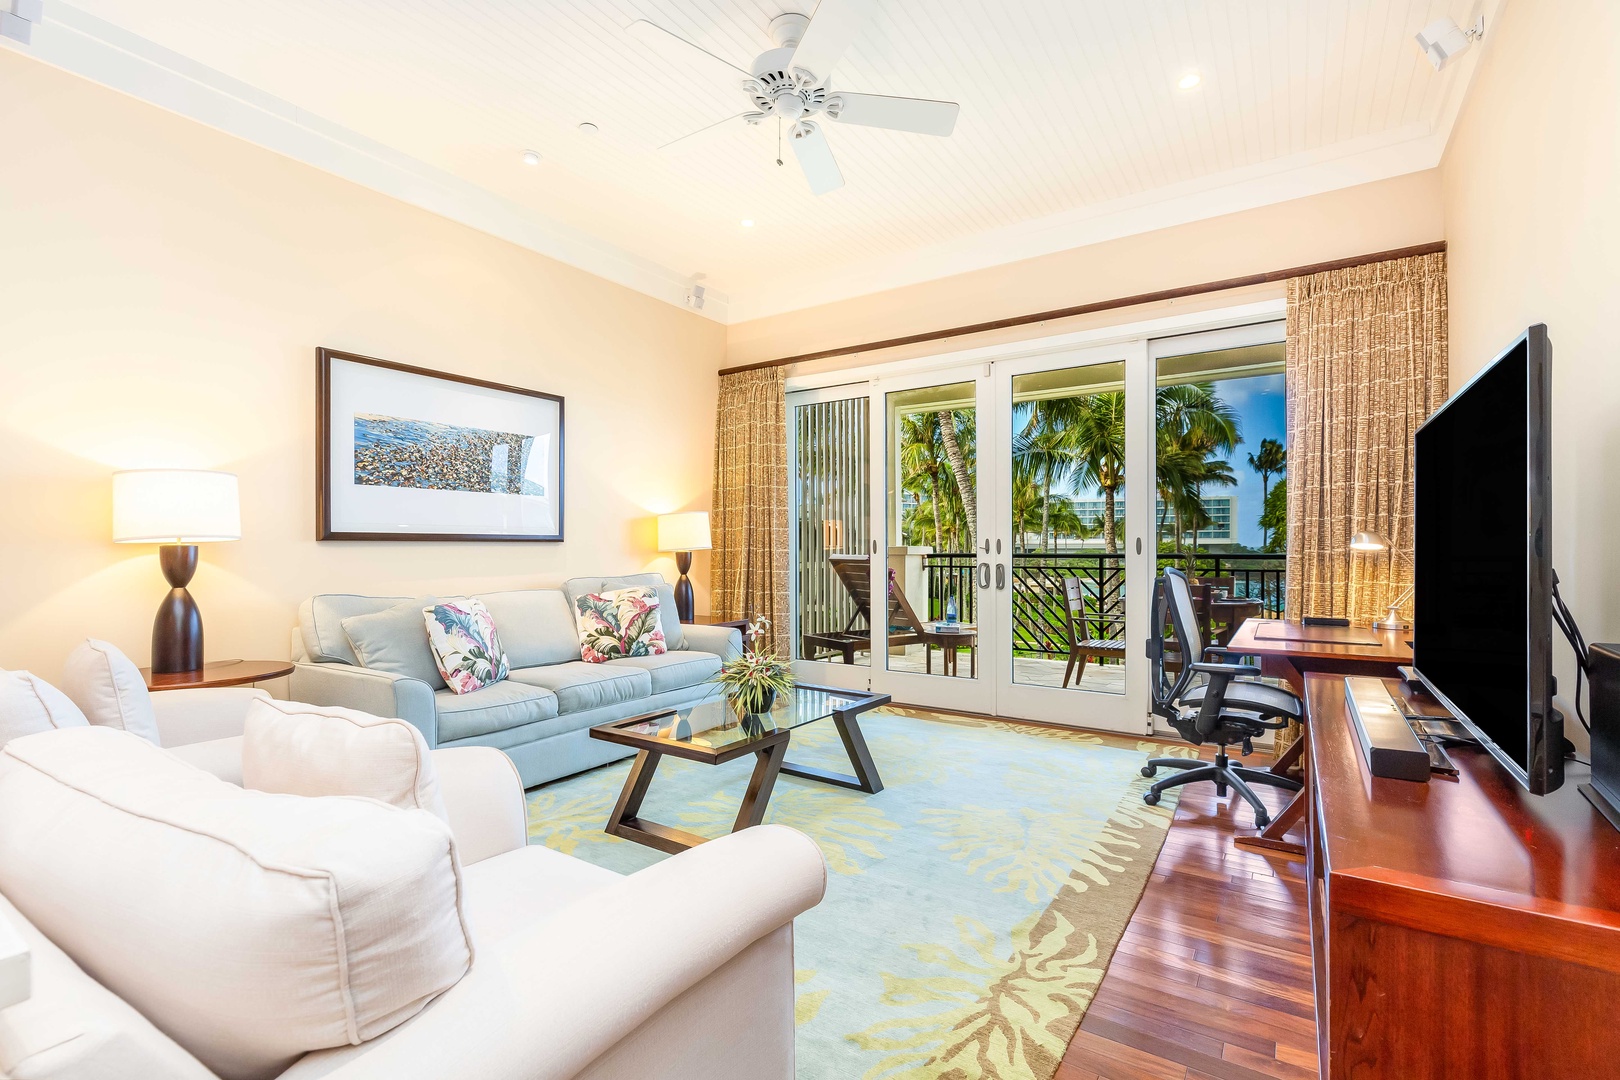 Kahuku Vacation Rentals, Turtle Bay Villas 311 - You’ll delight in the high ceilings and fine finishes such as Brazilian chestnut floors and granite countertops, and the central air conditioning and complimentary wireless internet service will provide you with every comfort of home.